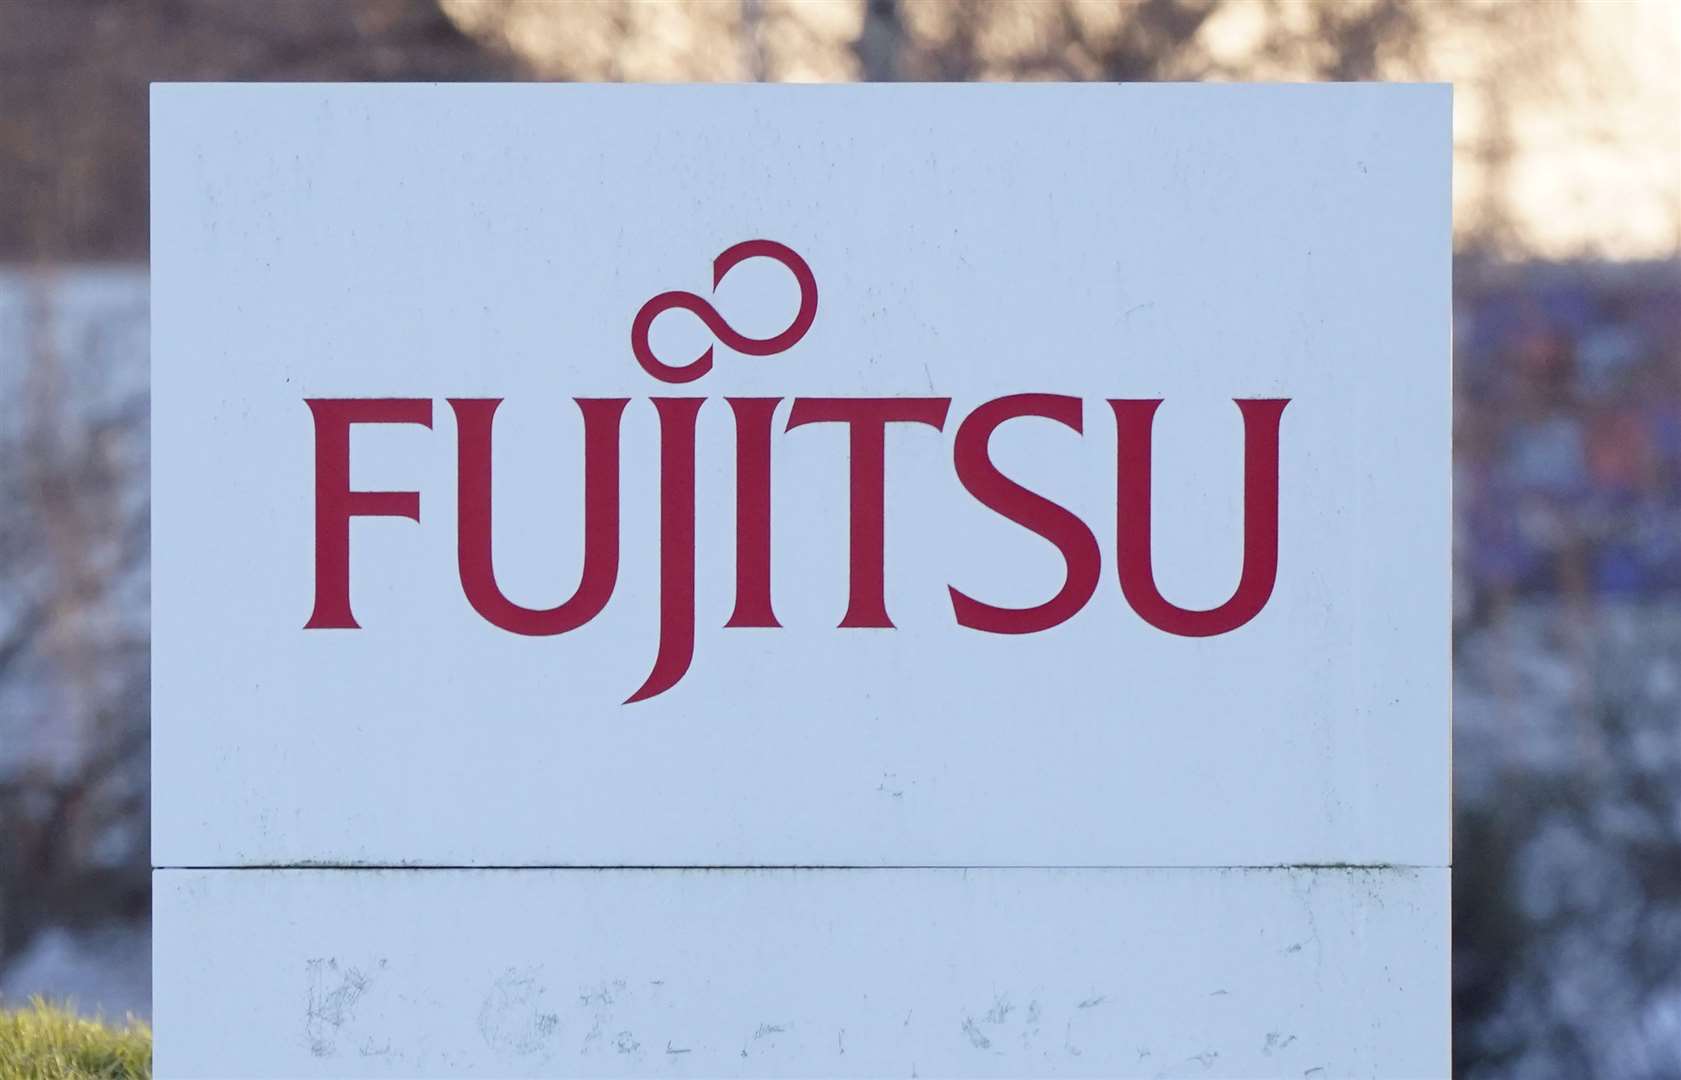 A Fujitsu staff member gave evidence at the inquiry on Wednesday (Andrew Matthews/PA)